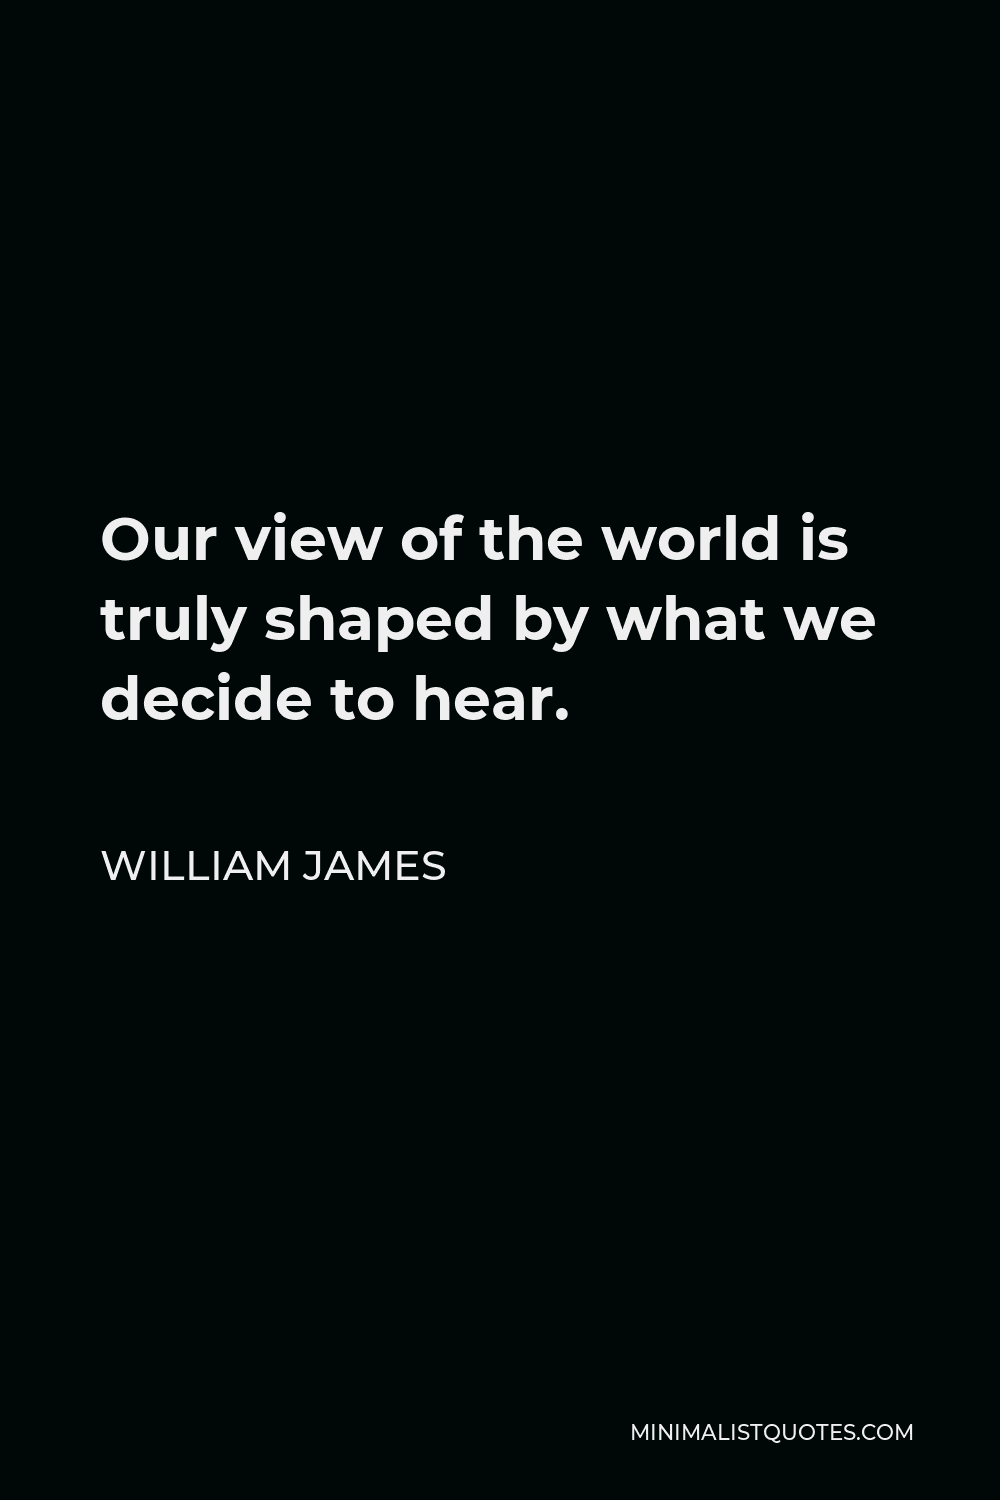 William James Quote - Our view of the world is truly shaped by what we decide to hear.